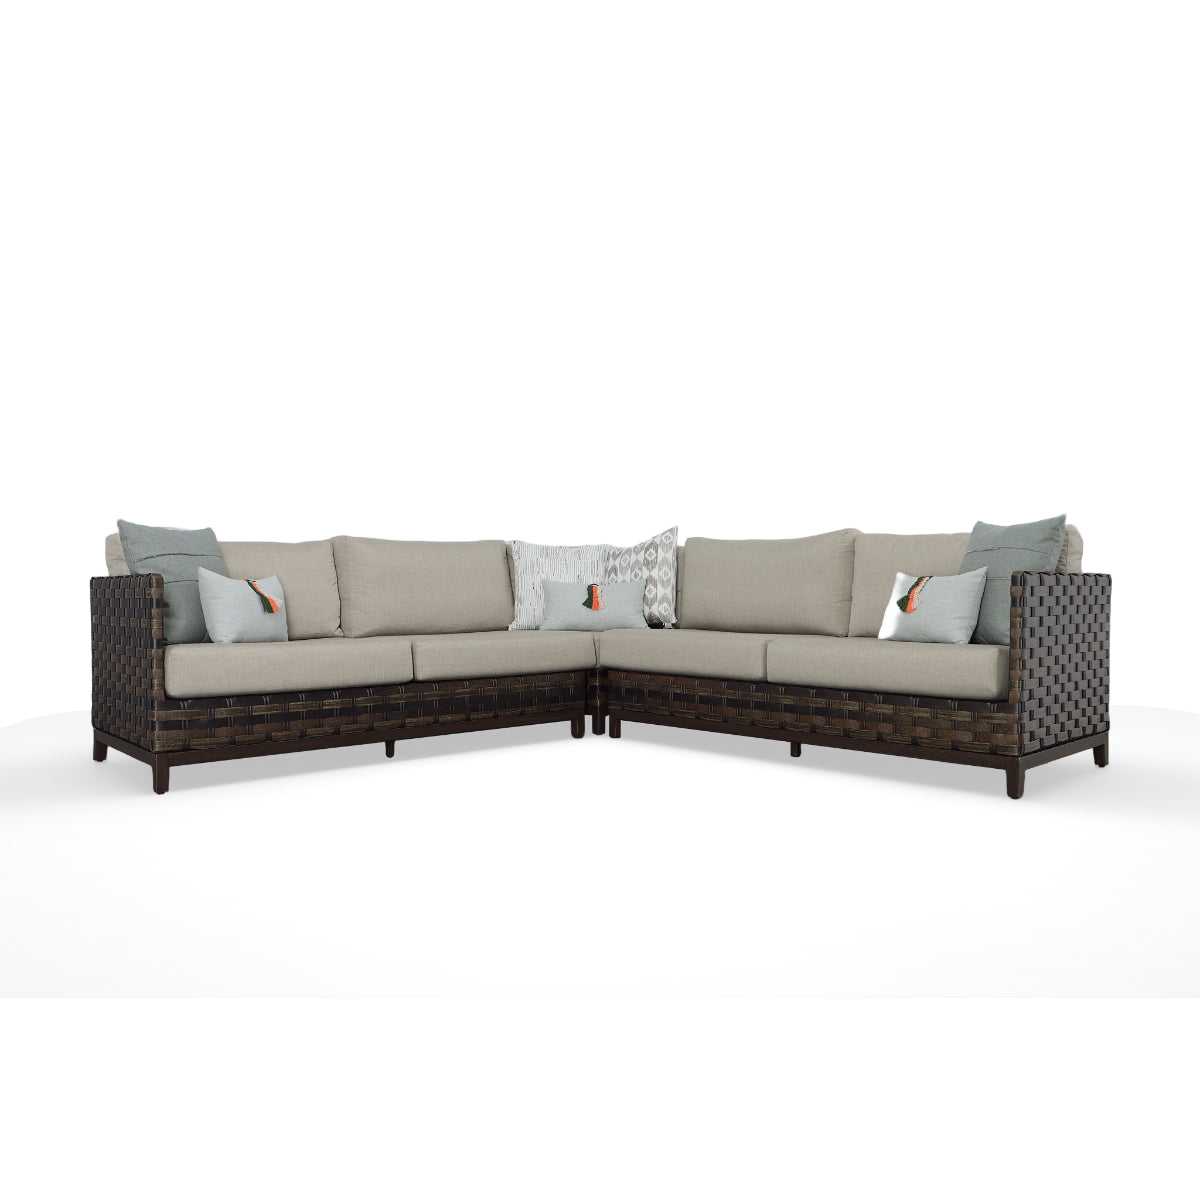 Plank and Hide, Nevis 3 Piece Sectional